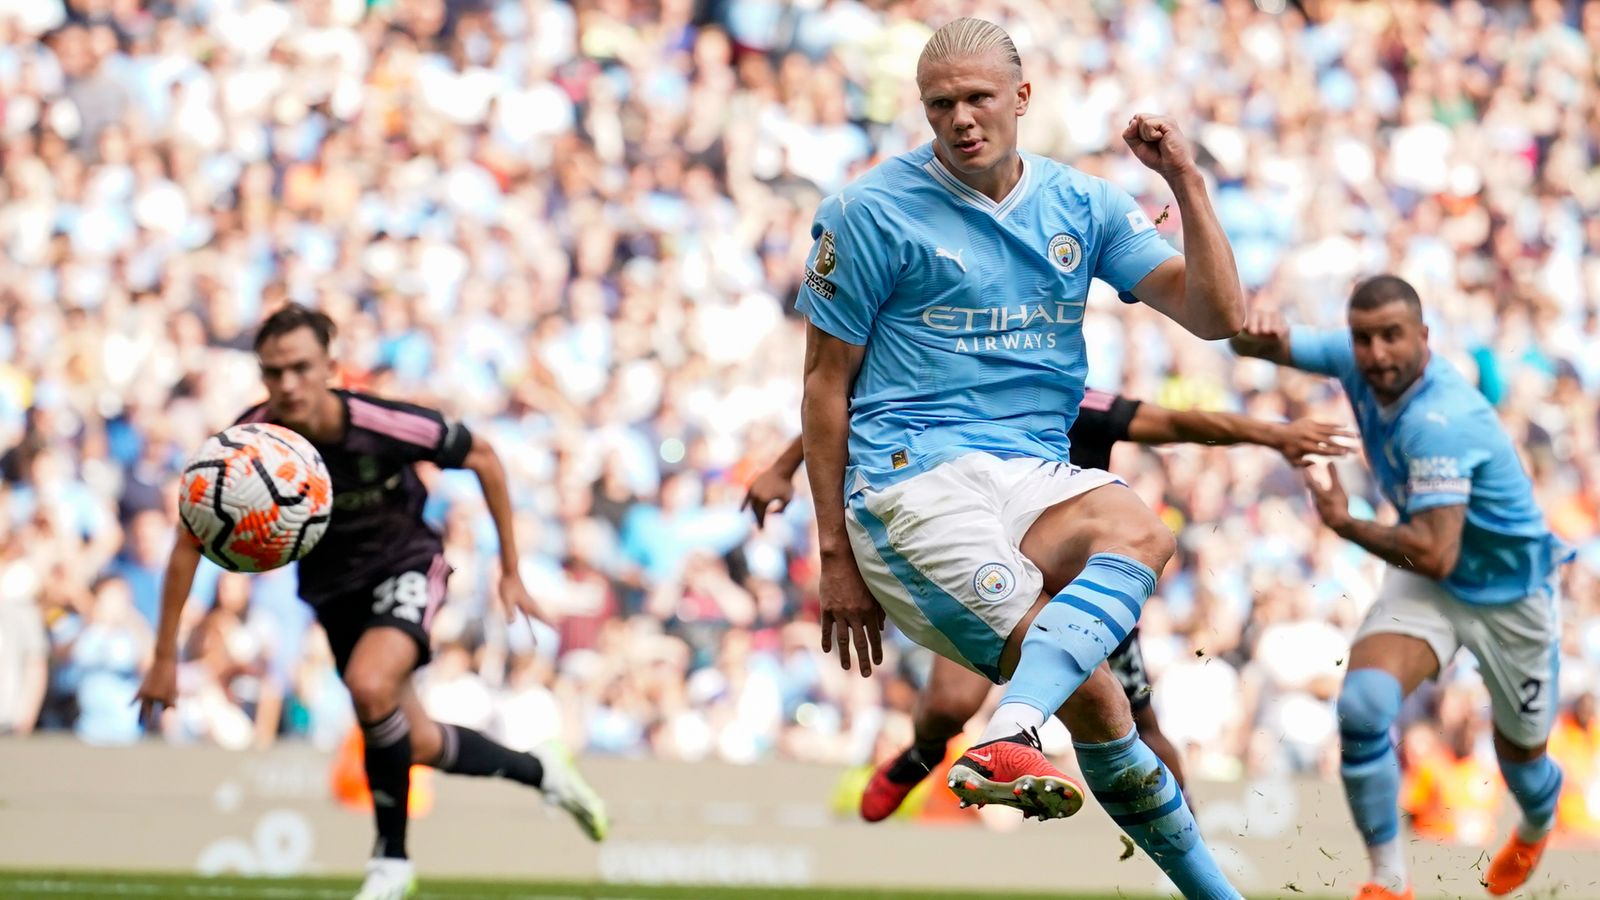 Man City hit five past Fulham after controversial ‘offside’ goal